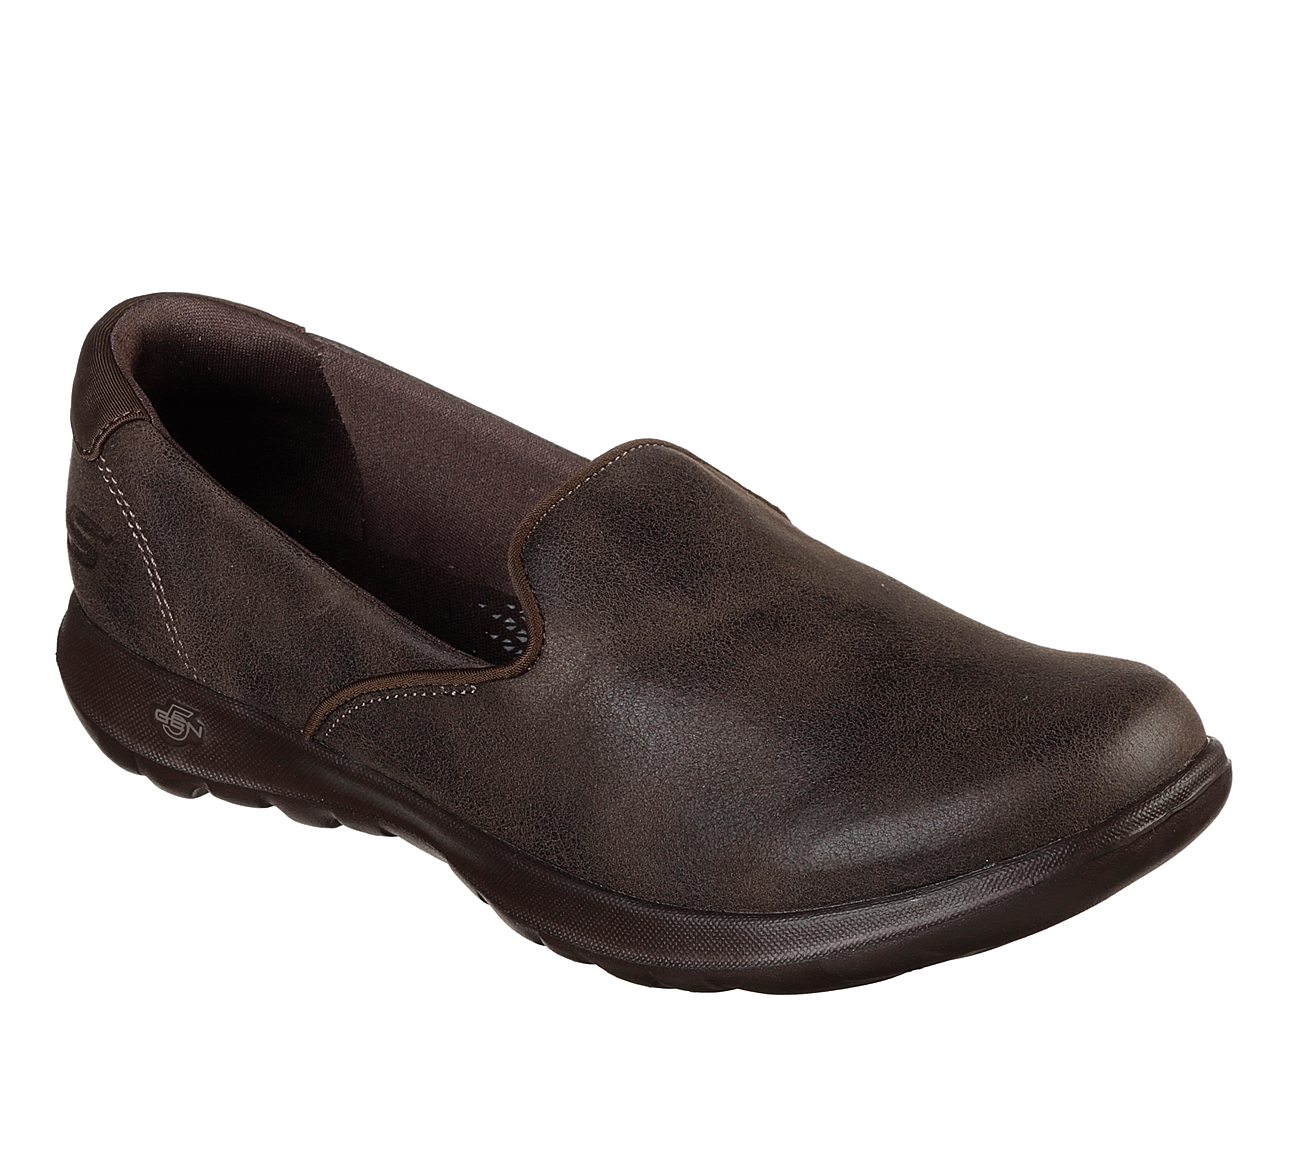 skechers go walk leather shoes